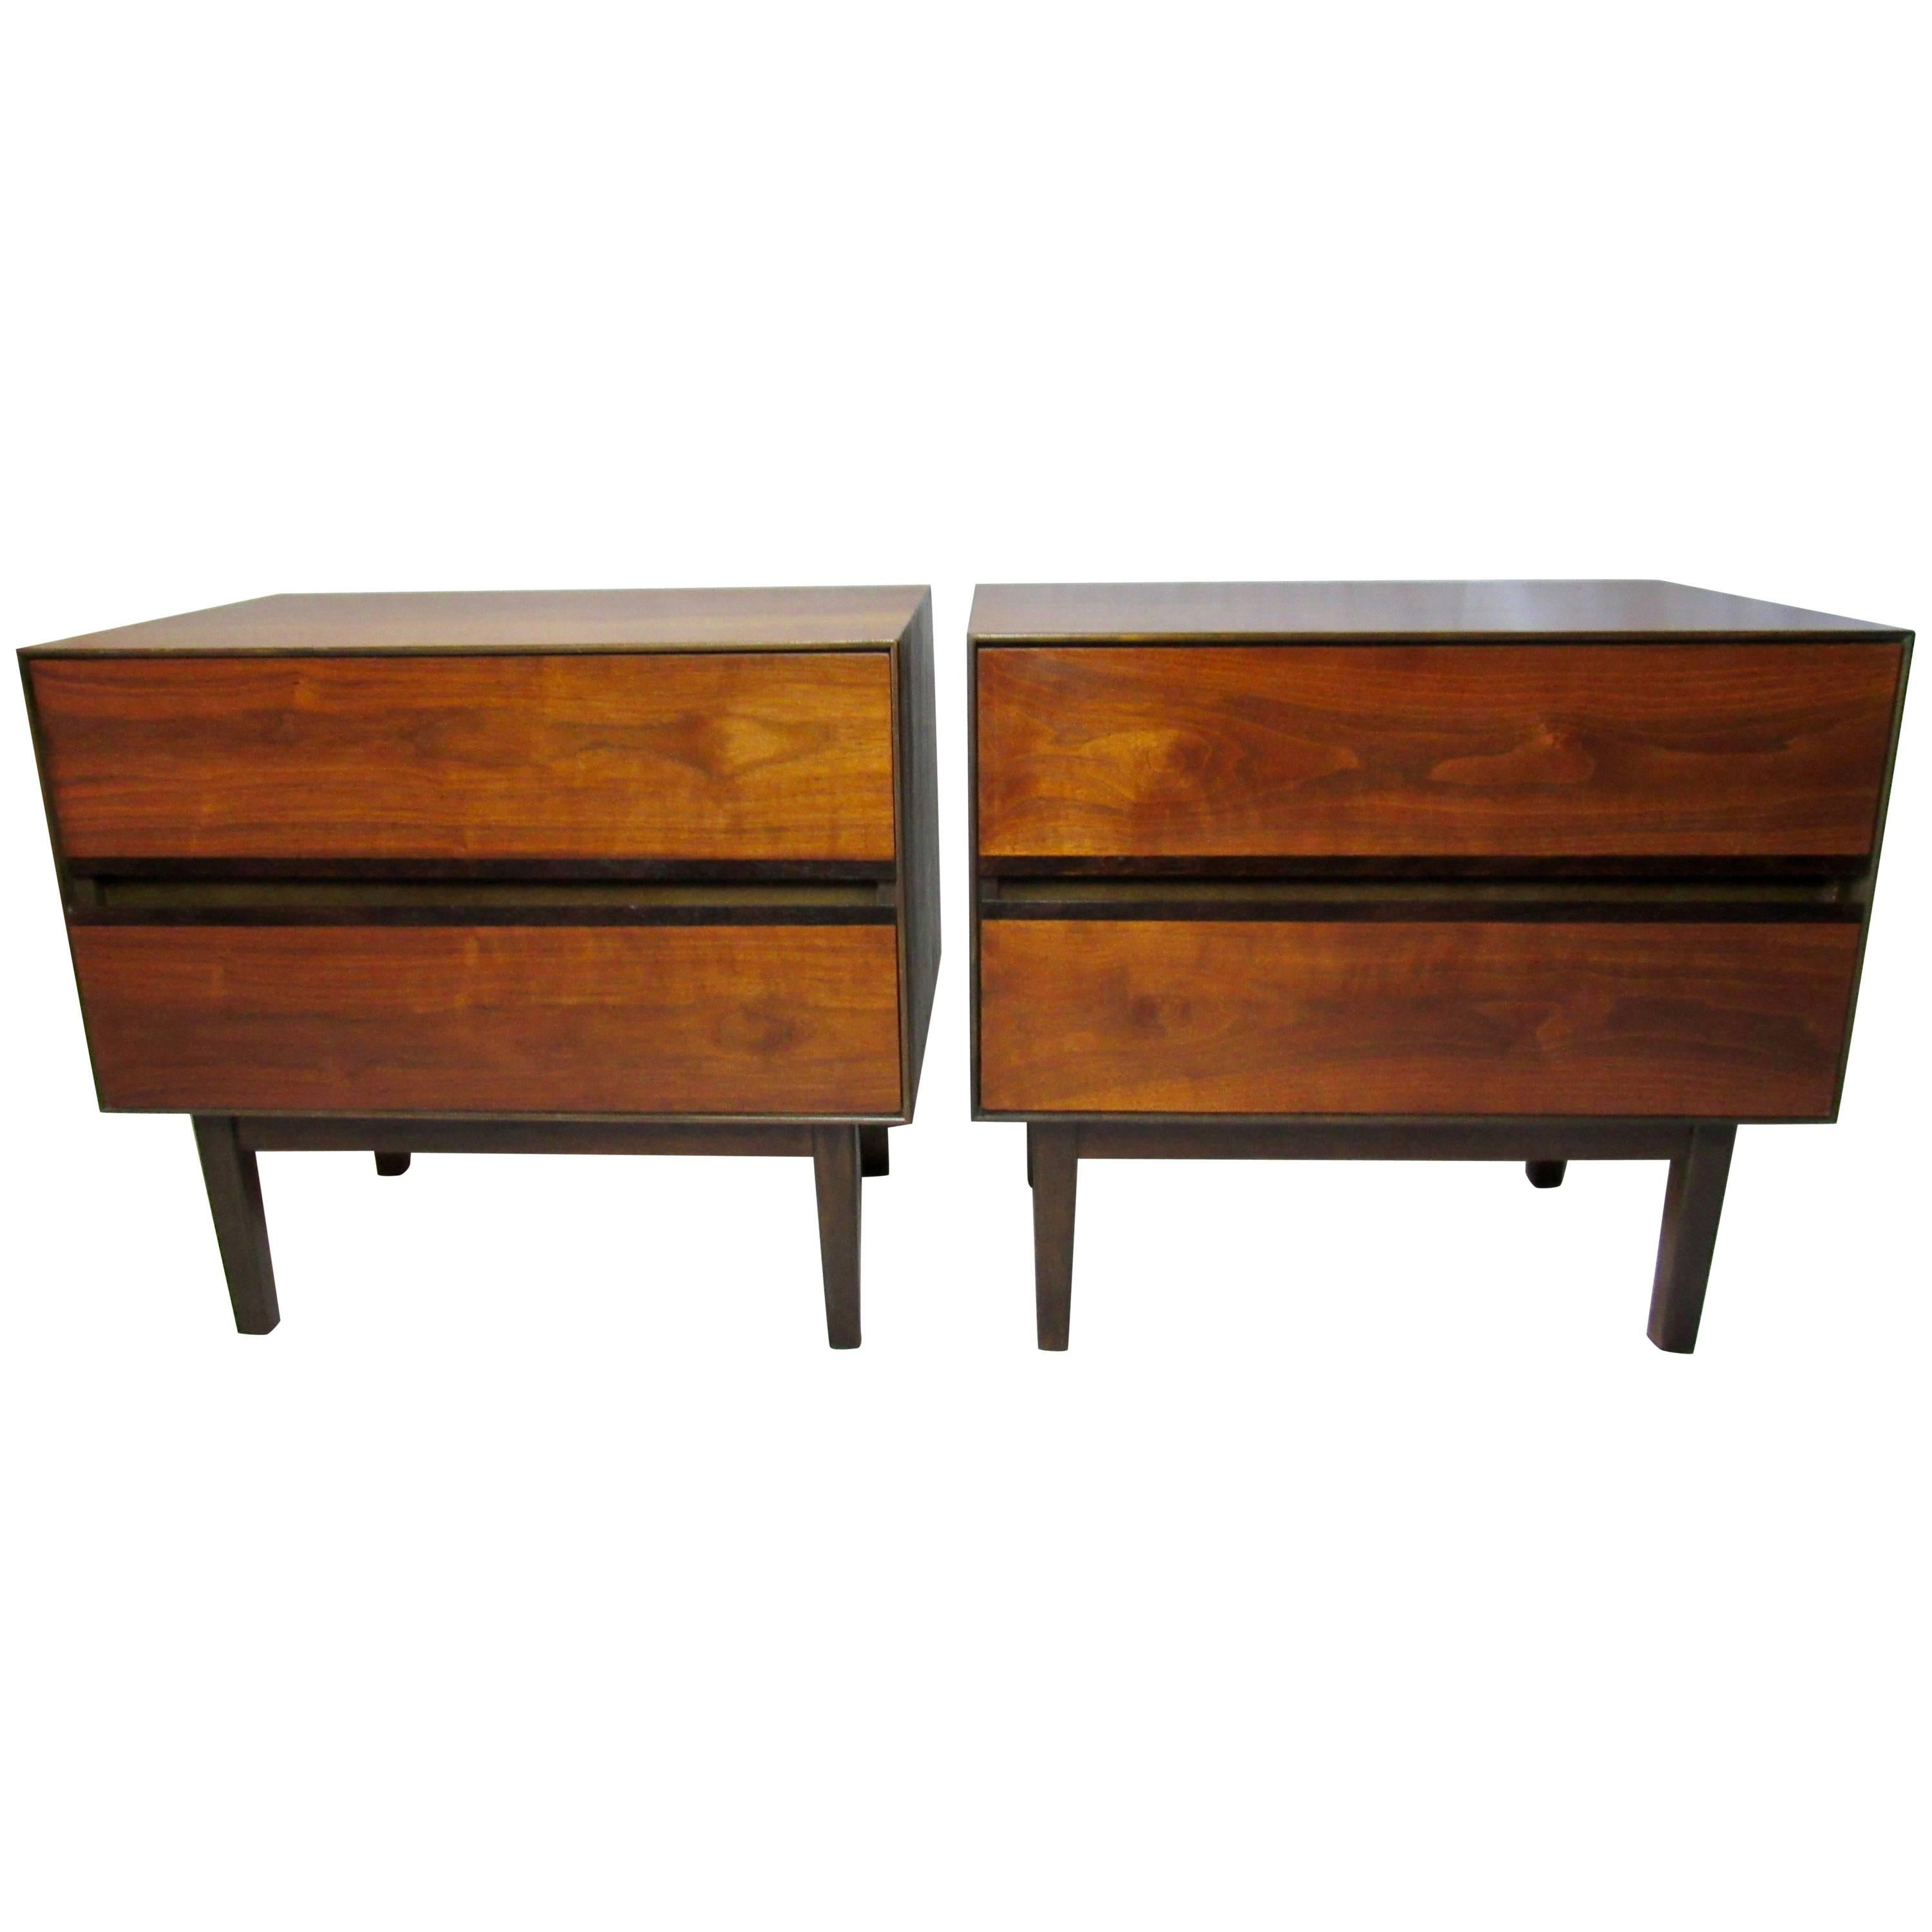 Walnut and Rosewood Nightstands by H. Paul Browning for Stanley Furniture Co.